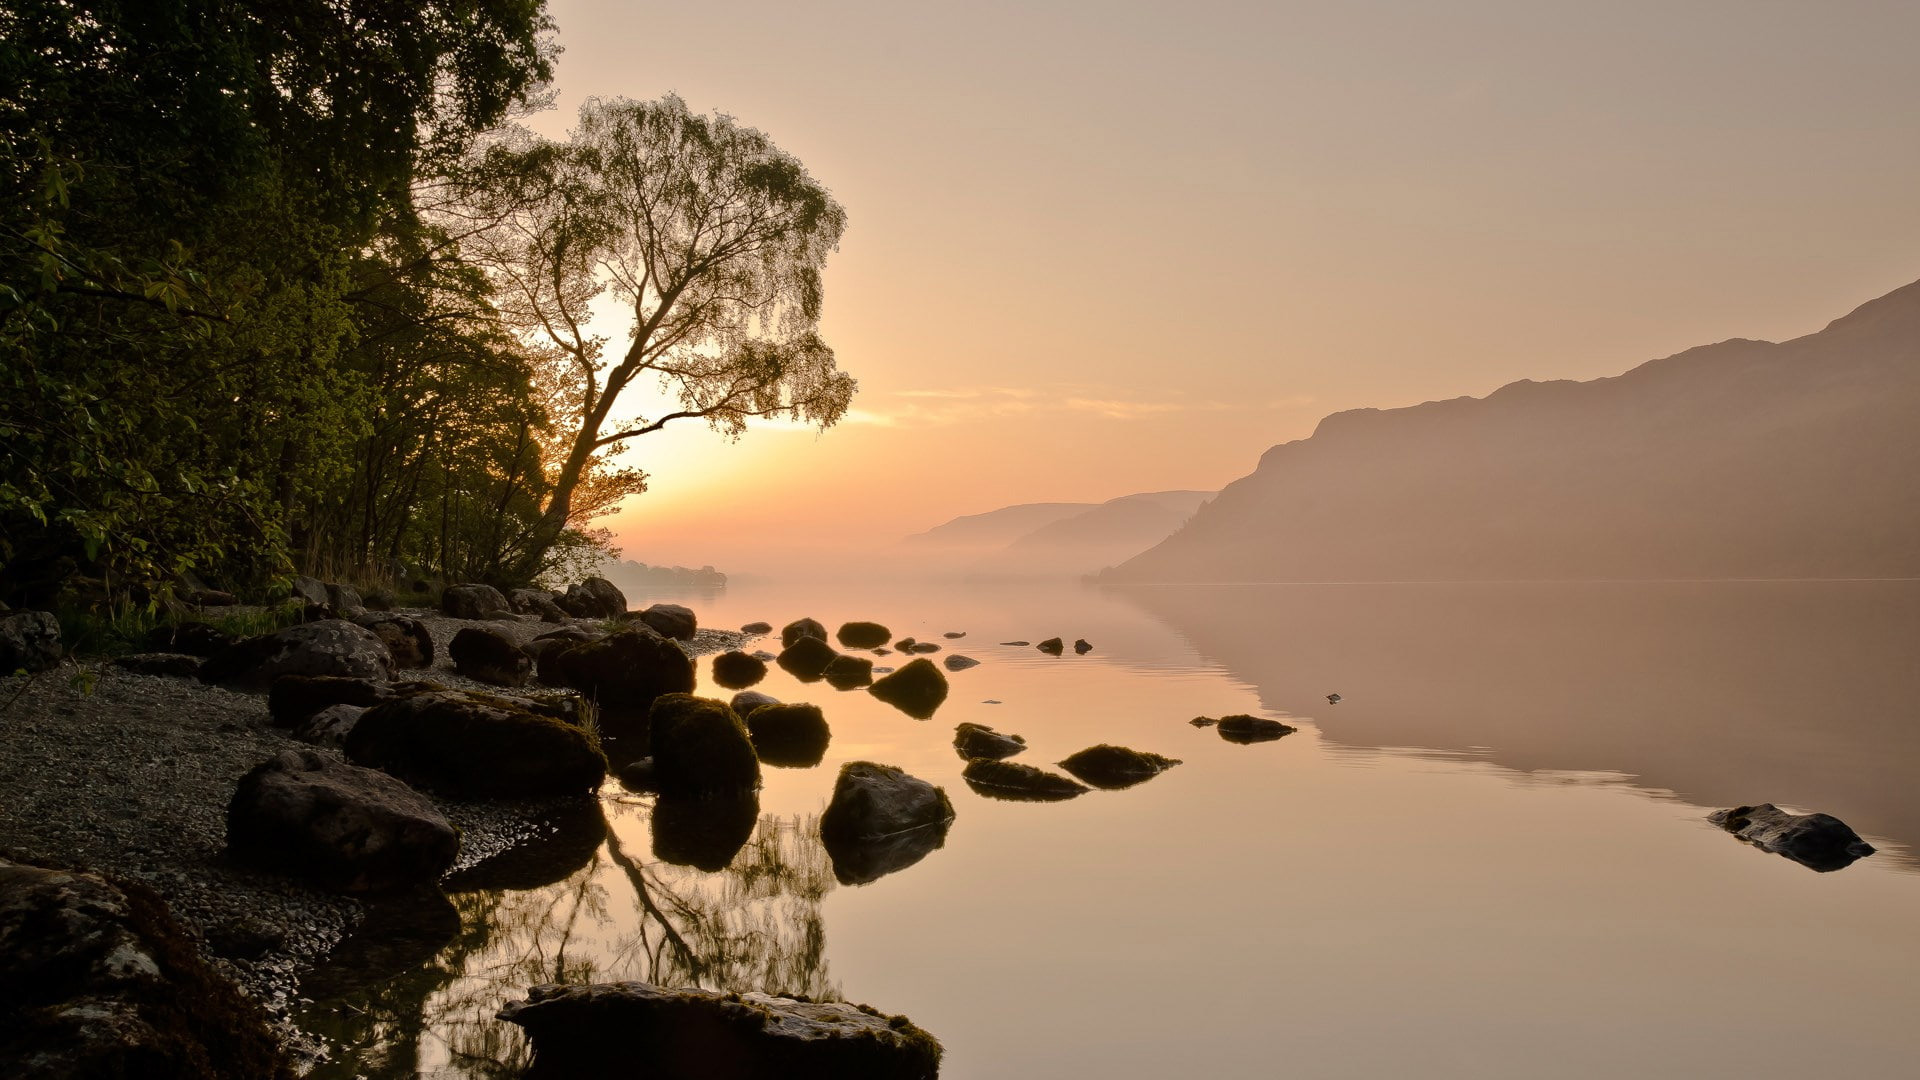 Stones On Calm Body Of Water Landscape View Of Fog Covered Mountains During Sunrise Scenery 2K Nature